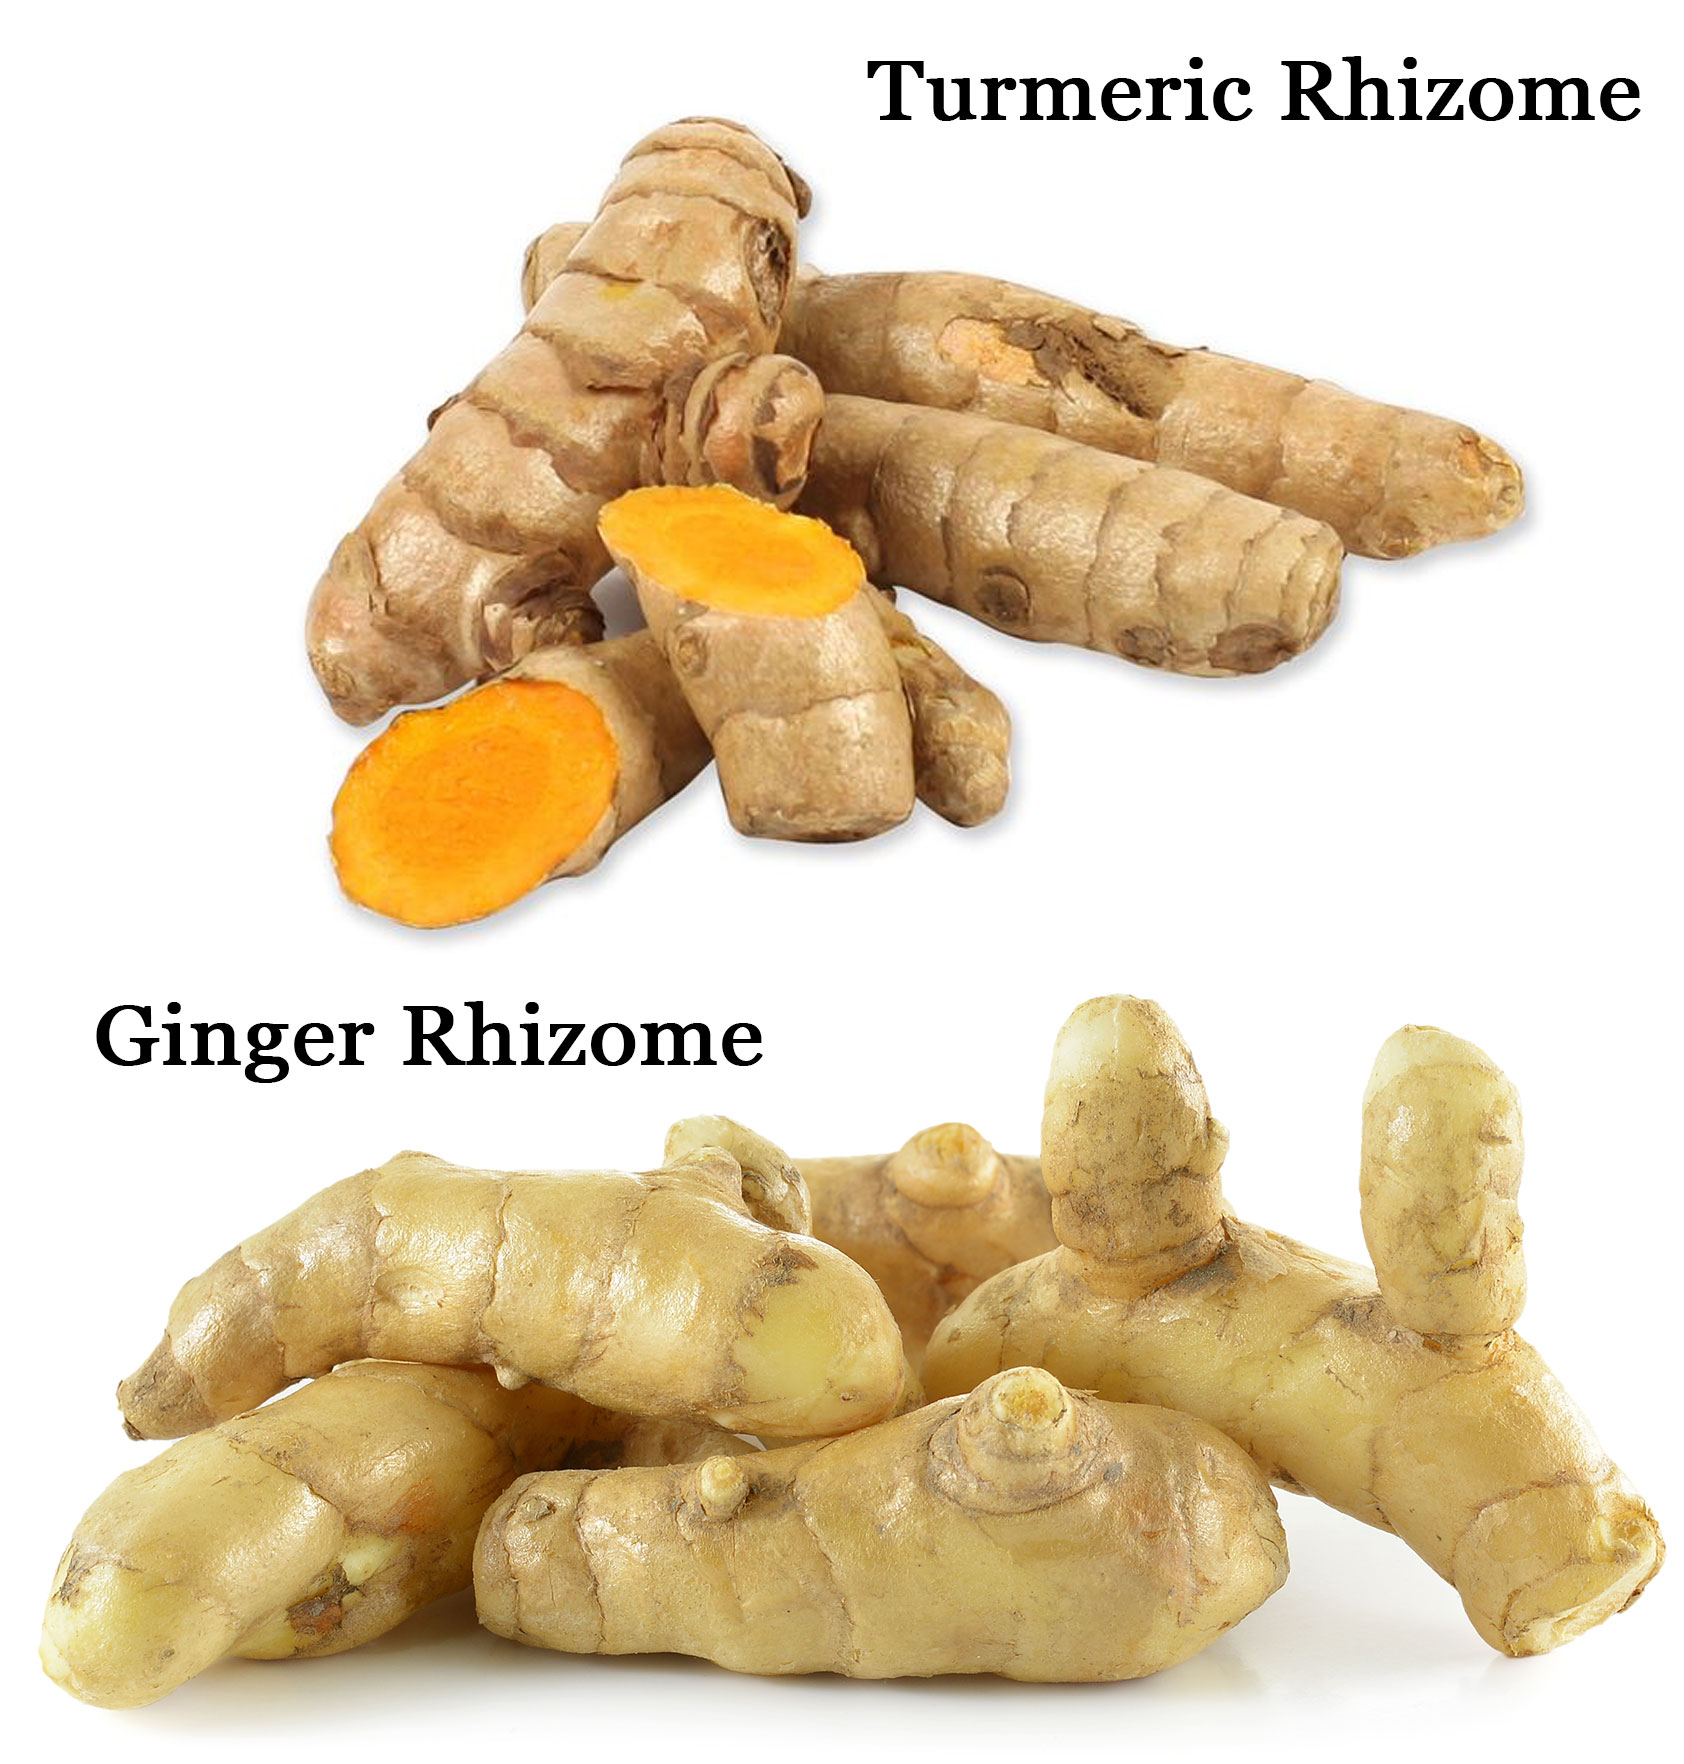 your-ultimate-guide-to-growing-turmeric-and-ginger-plus-why-you-should-turmeric-and-ginger-rhizome